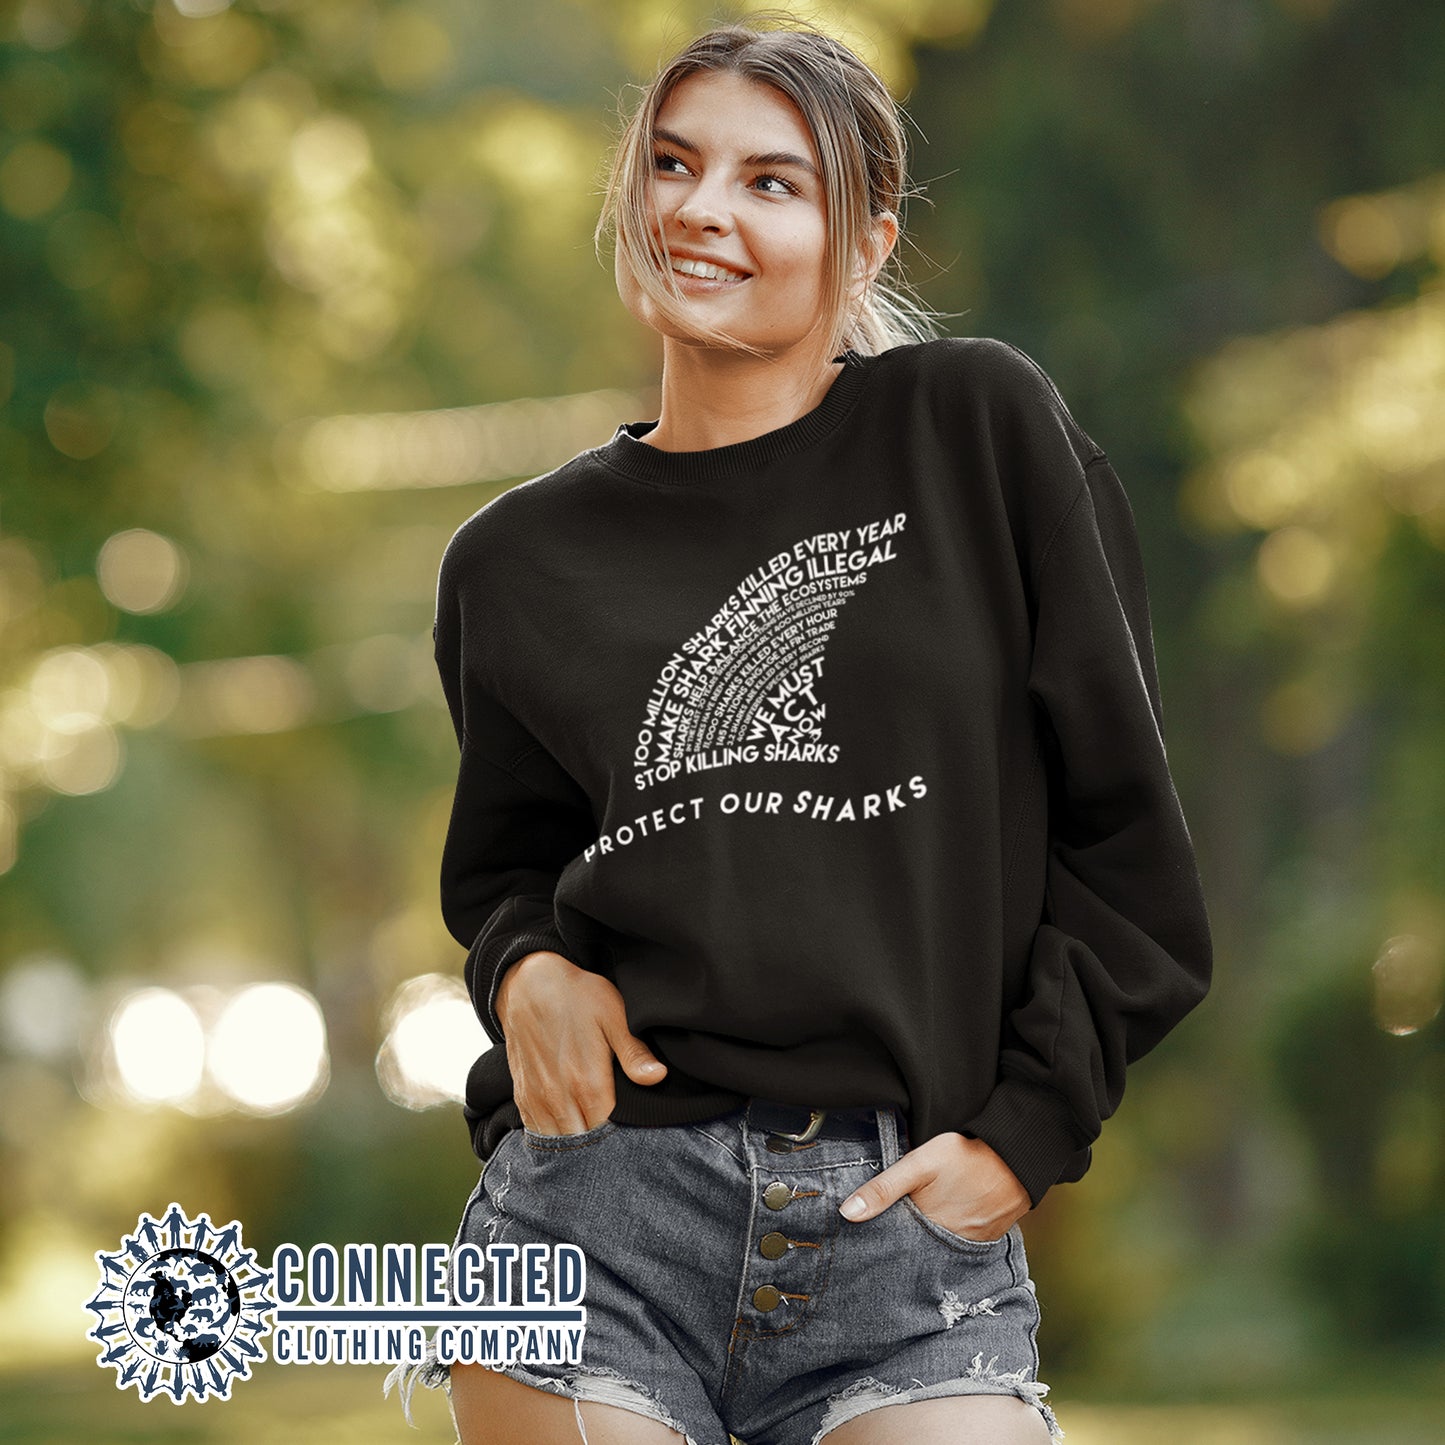 Model Wearing Black Protect Our Sharks Unisex Crewneck Sweatshirt - Connected Clothing Company - Ethically and Sustainably Made - 10% of profits donated to shark conservation and ocean conservation